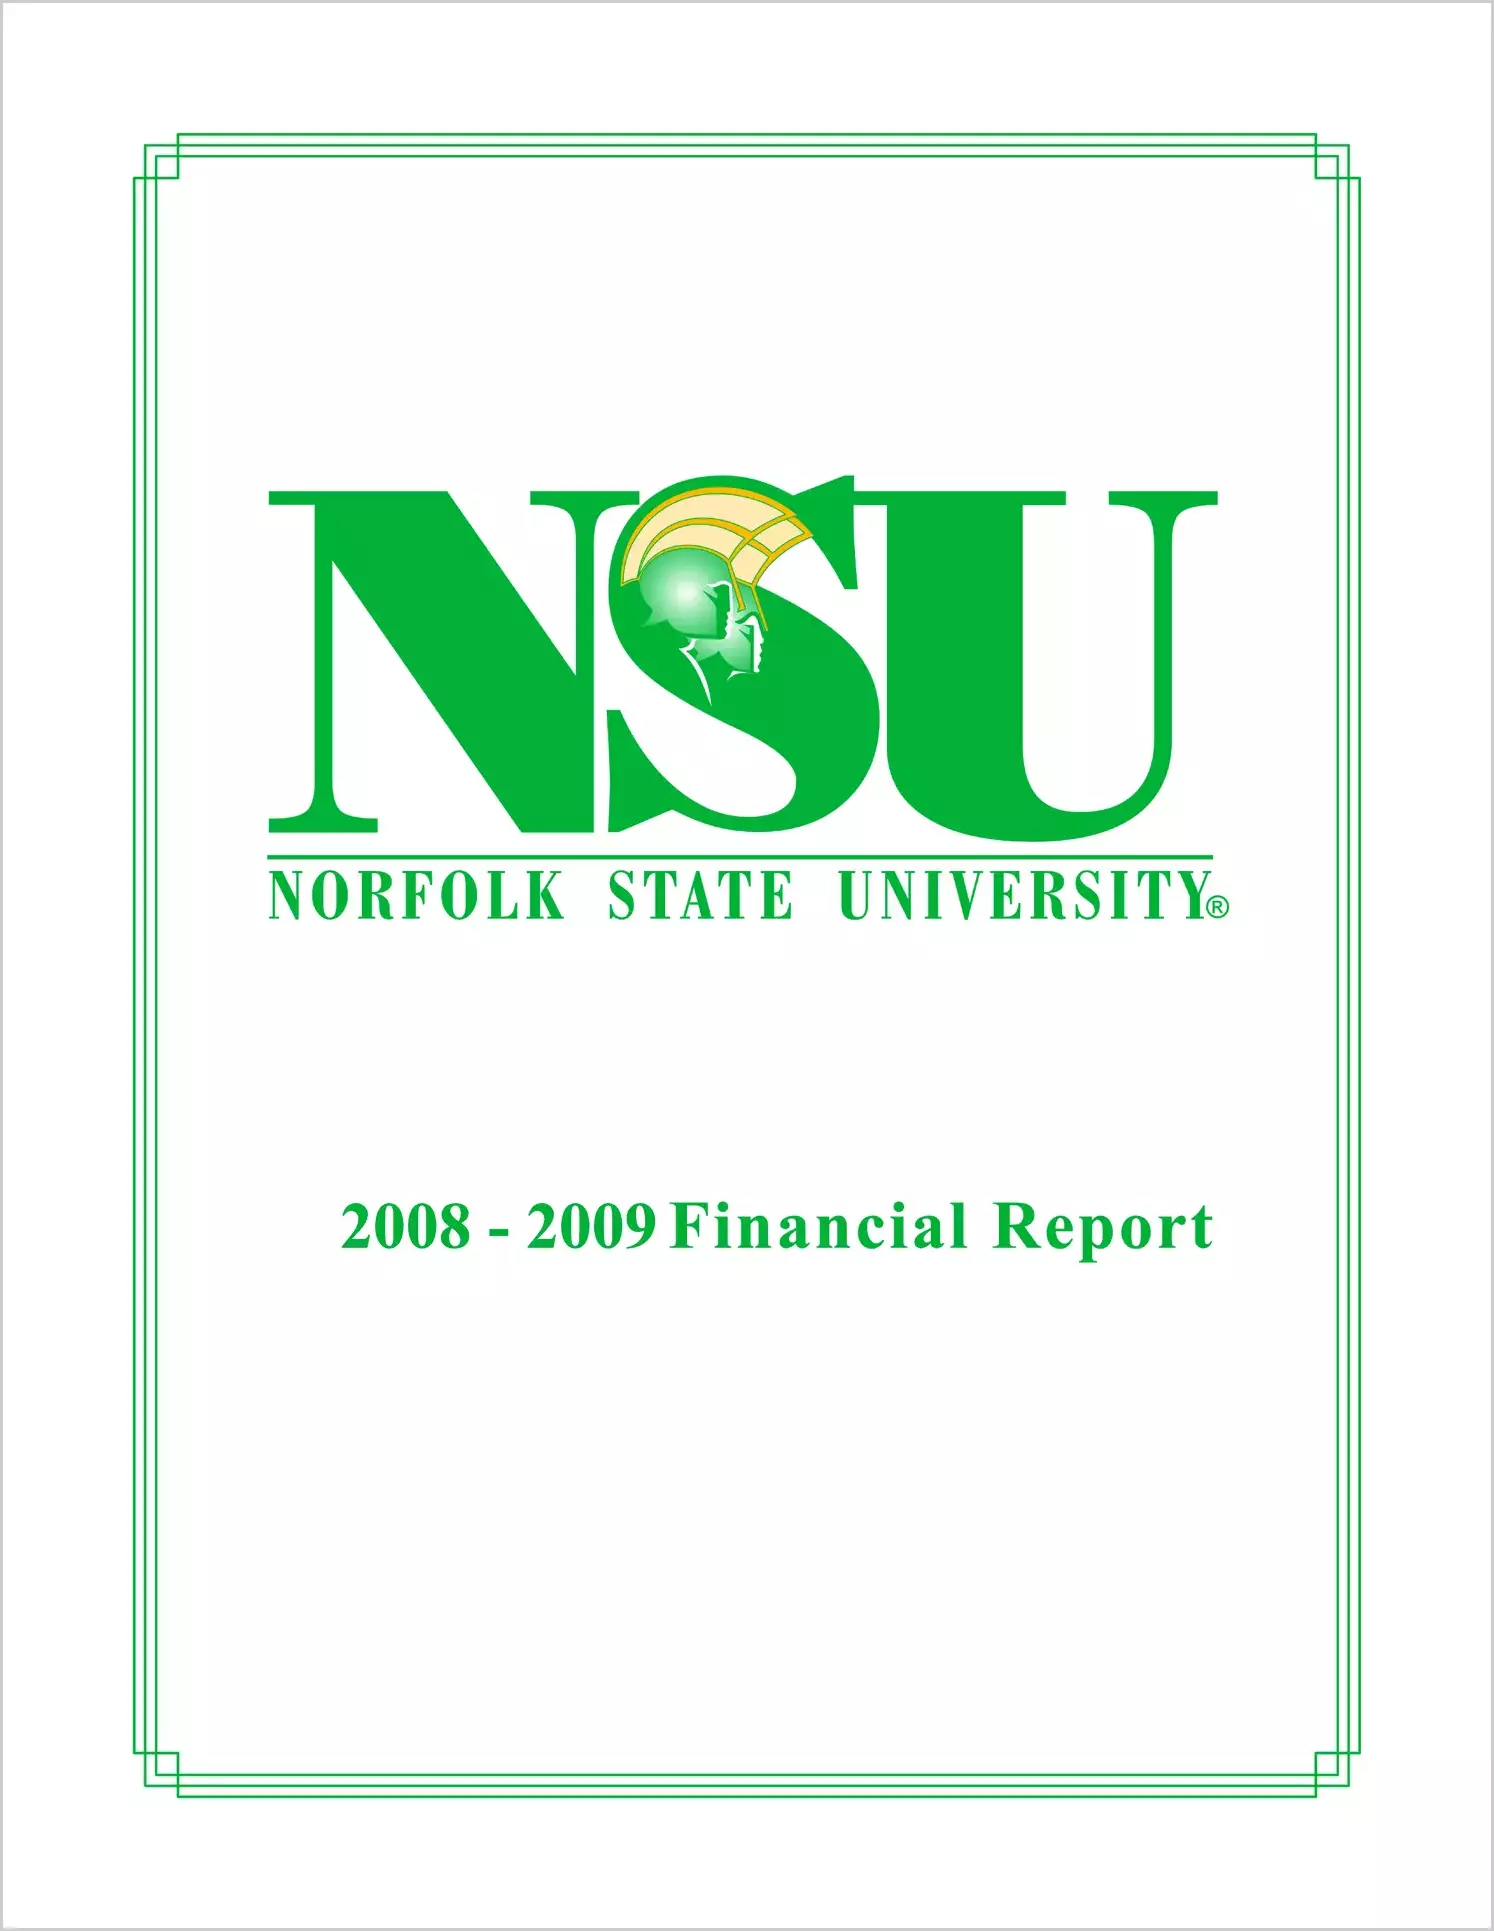 Norfolk State University Financial Statements for the year ended June 30, 2009